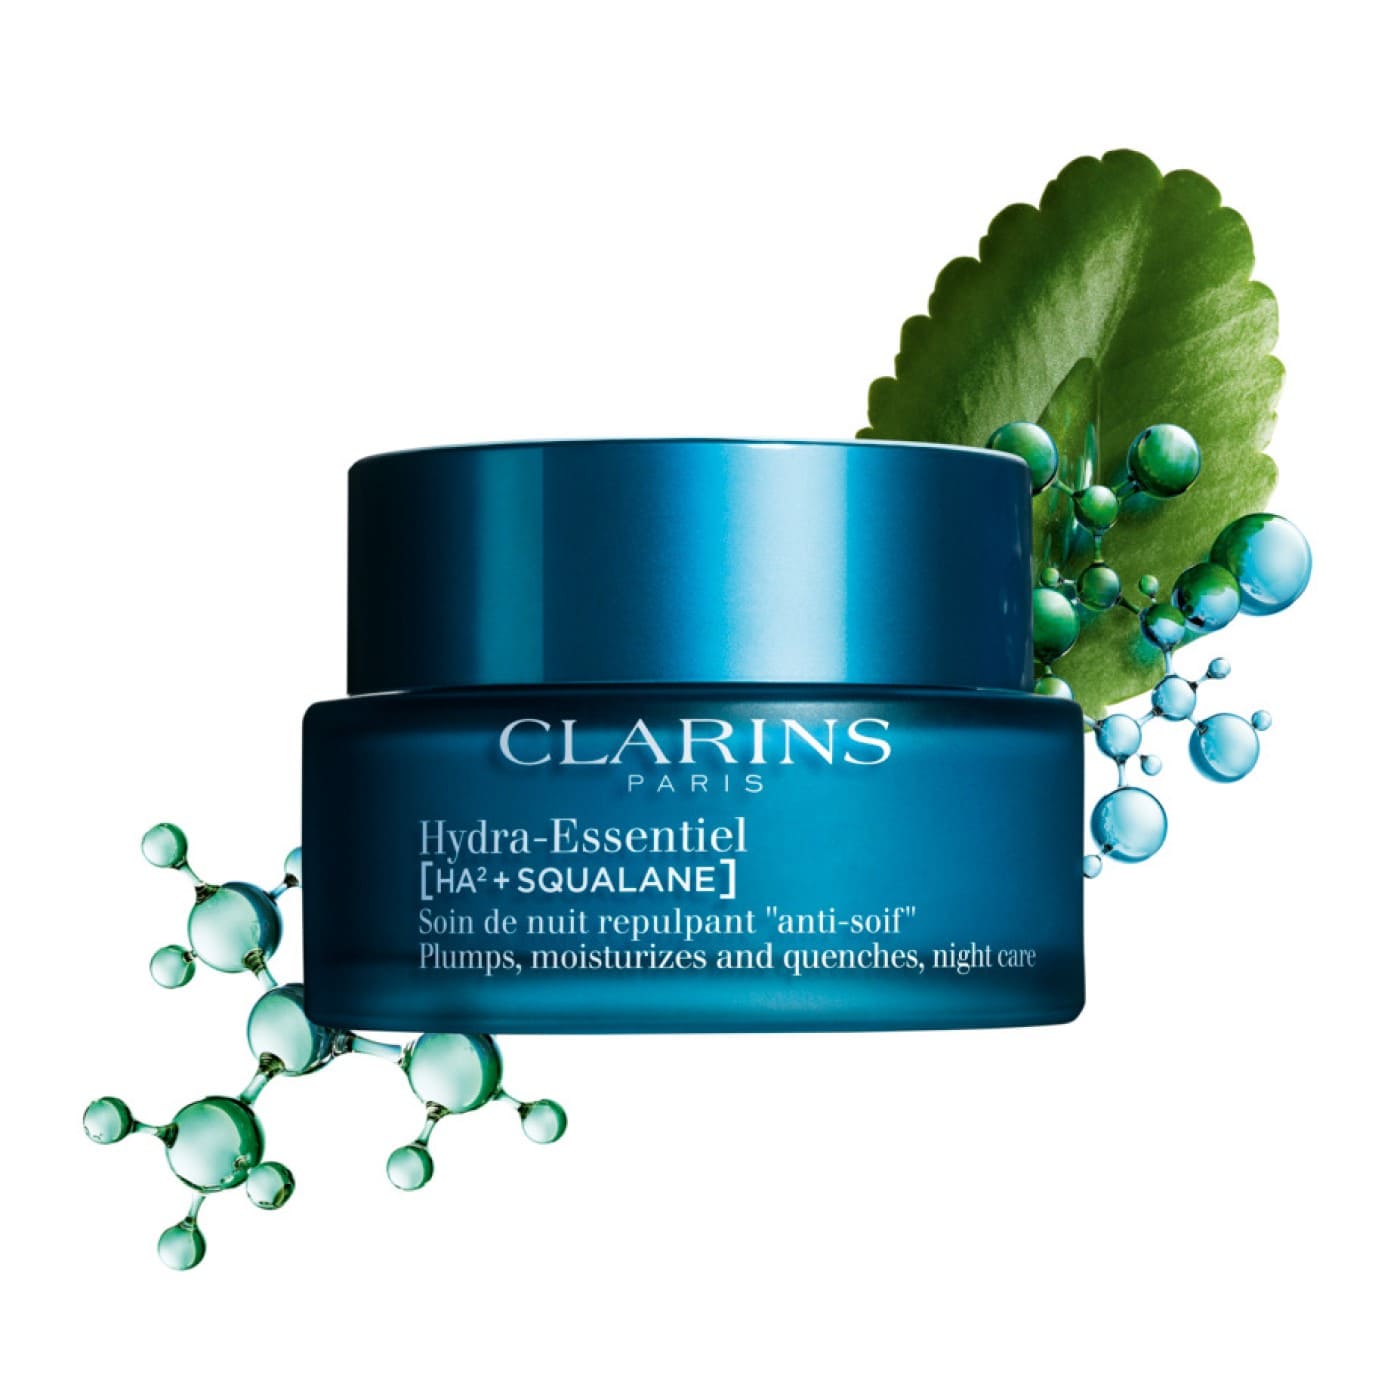 Hyaluronic Acid Face Creams, Moisturizers, & Serums | CLARINS®